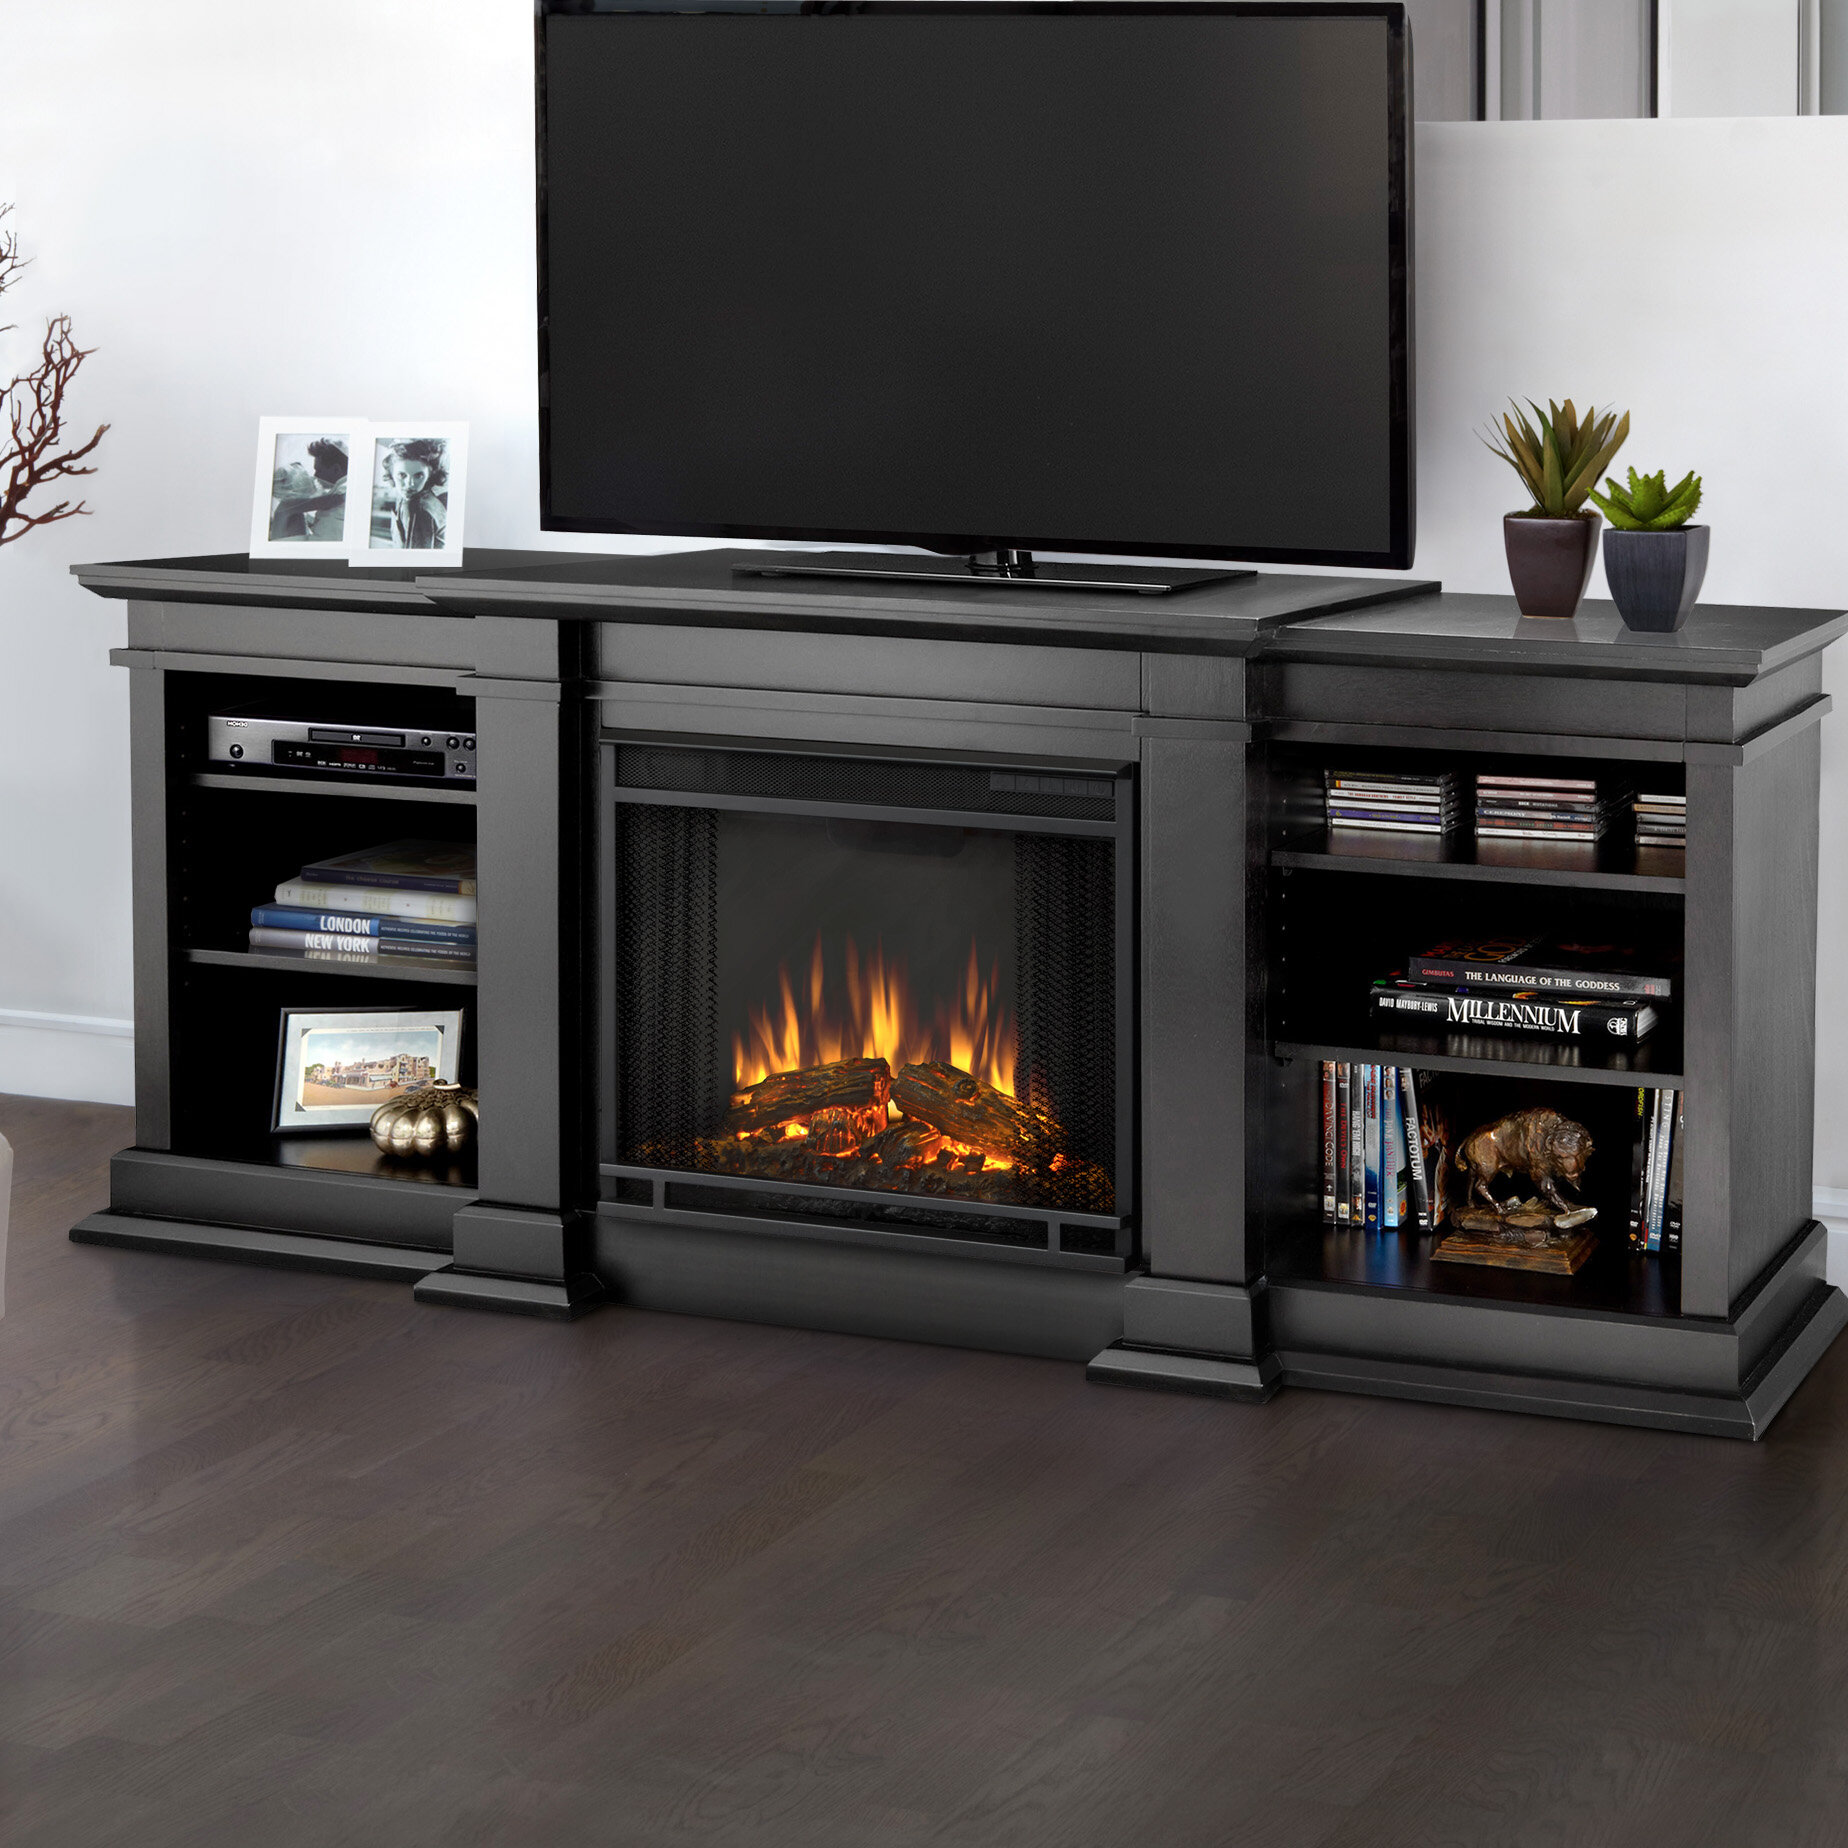 Entertainment Wall Units with Fireplace Best Of 23 Fresh Electric Fireplace Wall Units Entertainment Center